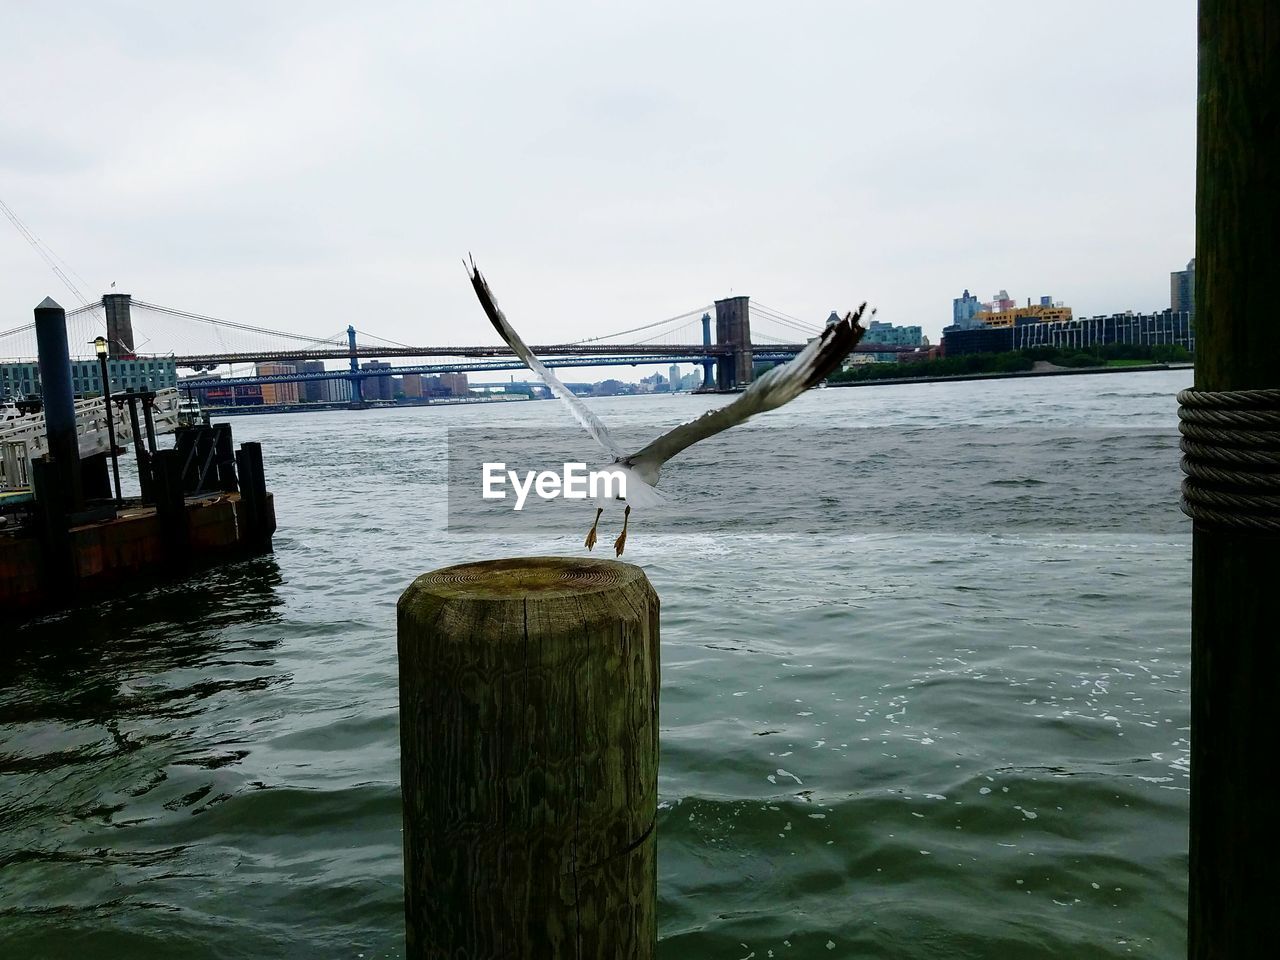 Seagull taking off from wooden post against brooklyn bridge over east river